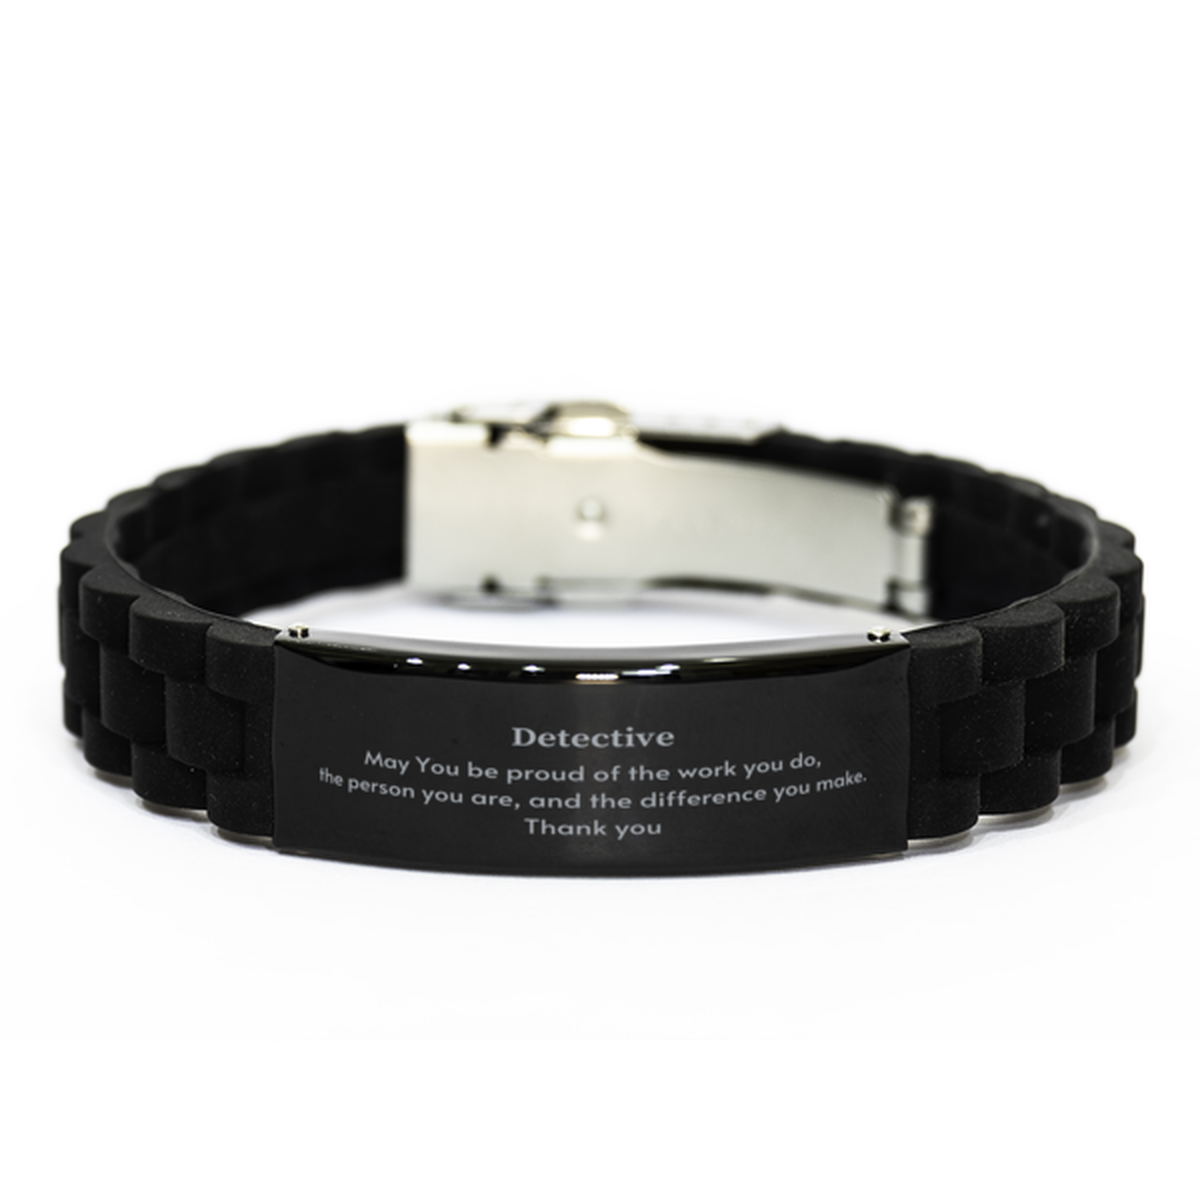 Heartwarming Black Glidelock Clasp Bracelet Retirement Coworkers Gifts for Detective, Detective May You be proud of the work you do, the person you are Gifts for Boss Men Women Friends